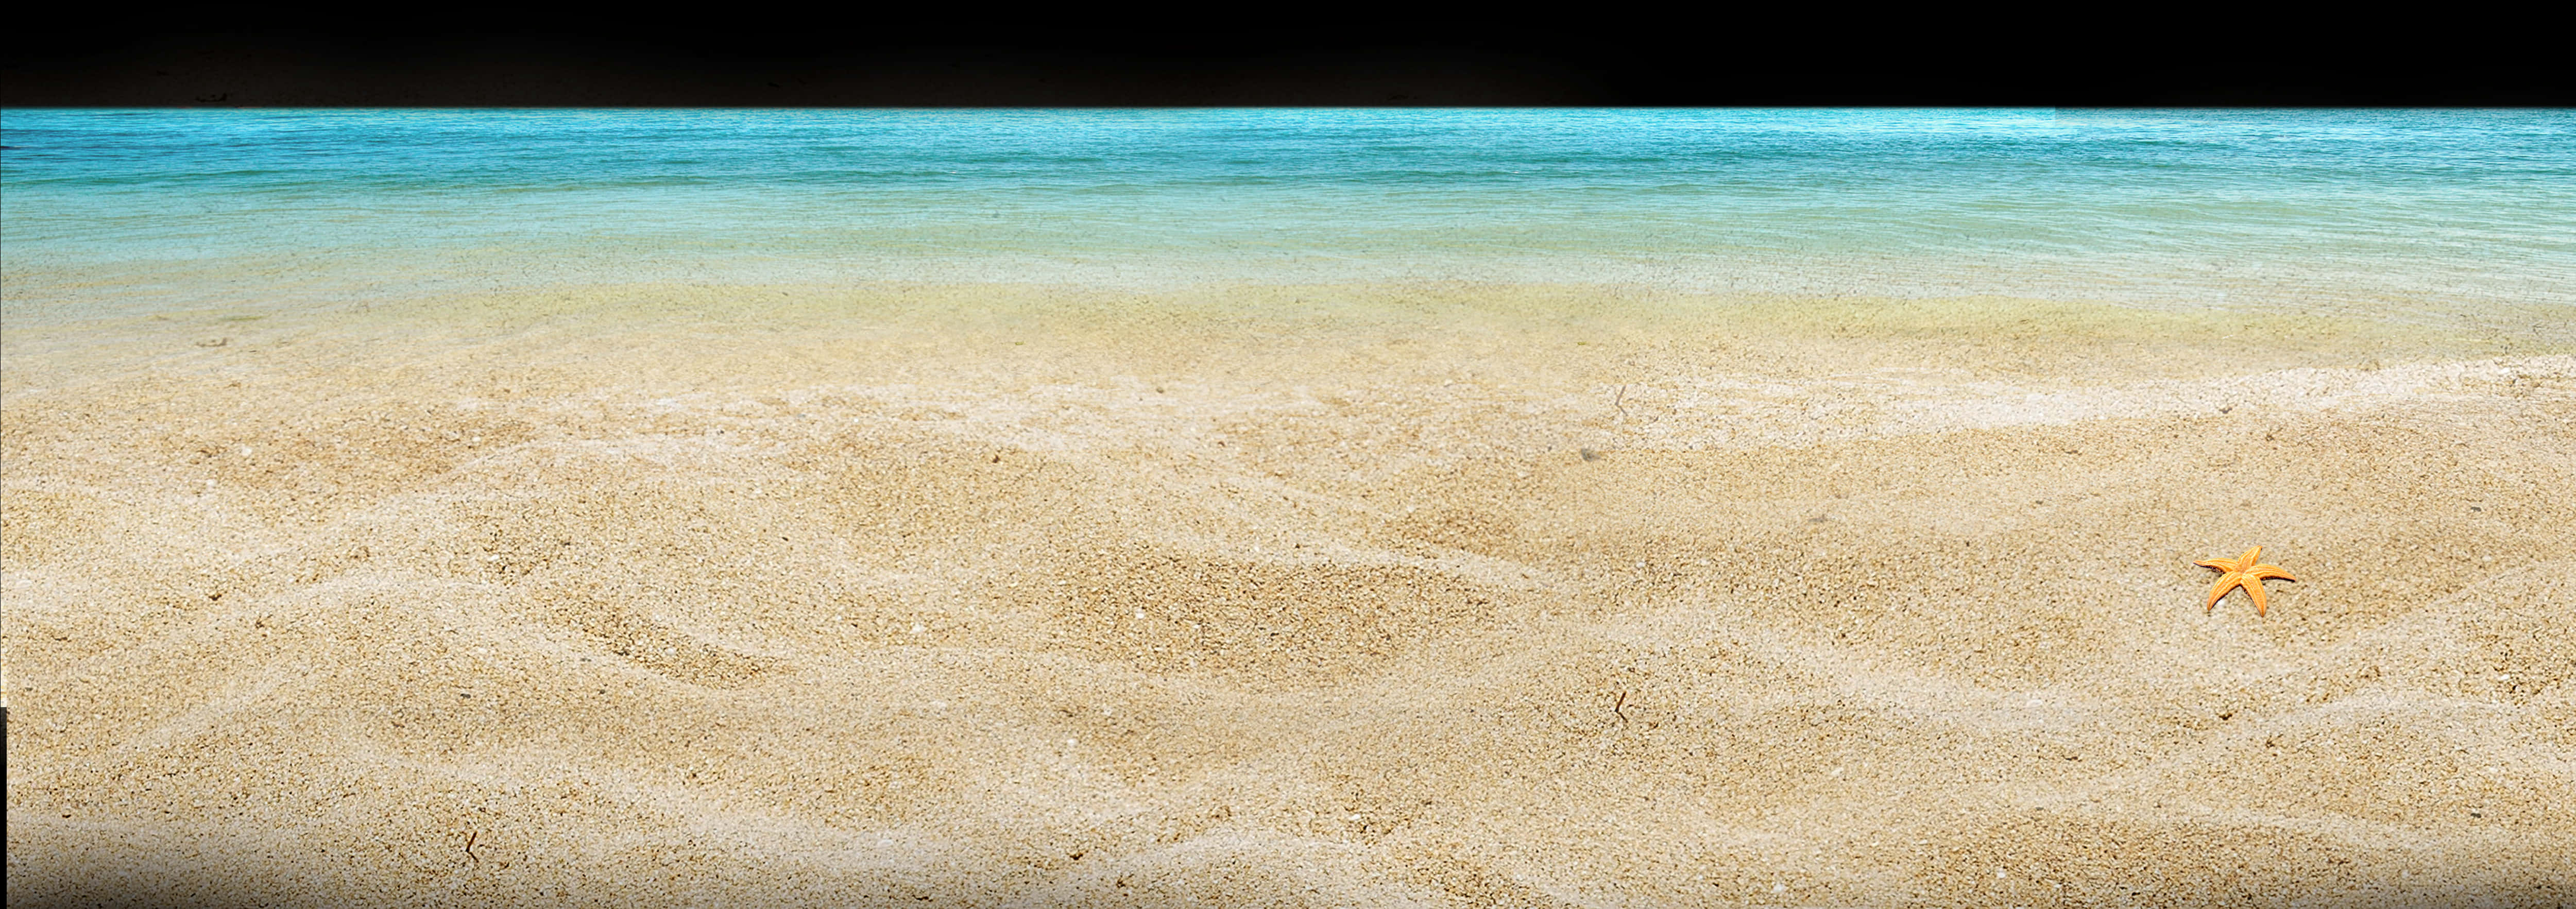 A Sandy Beach With Blue Water